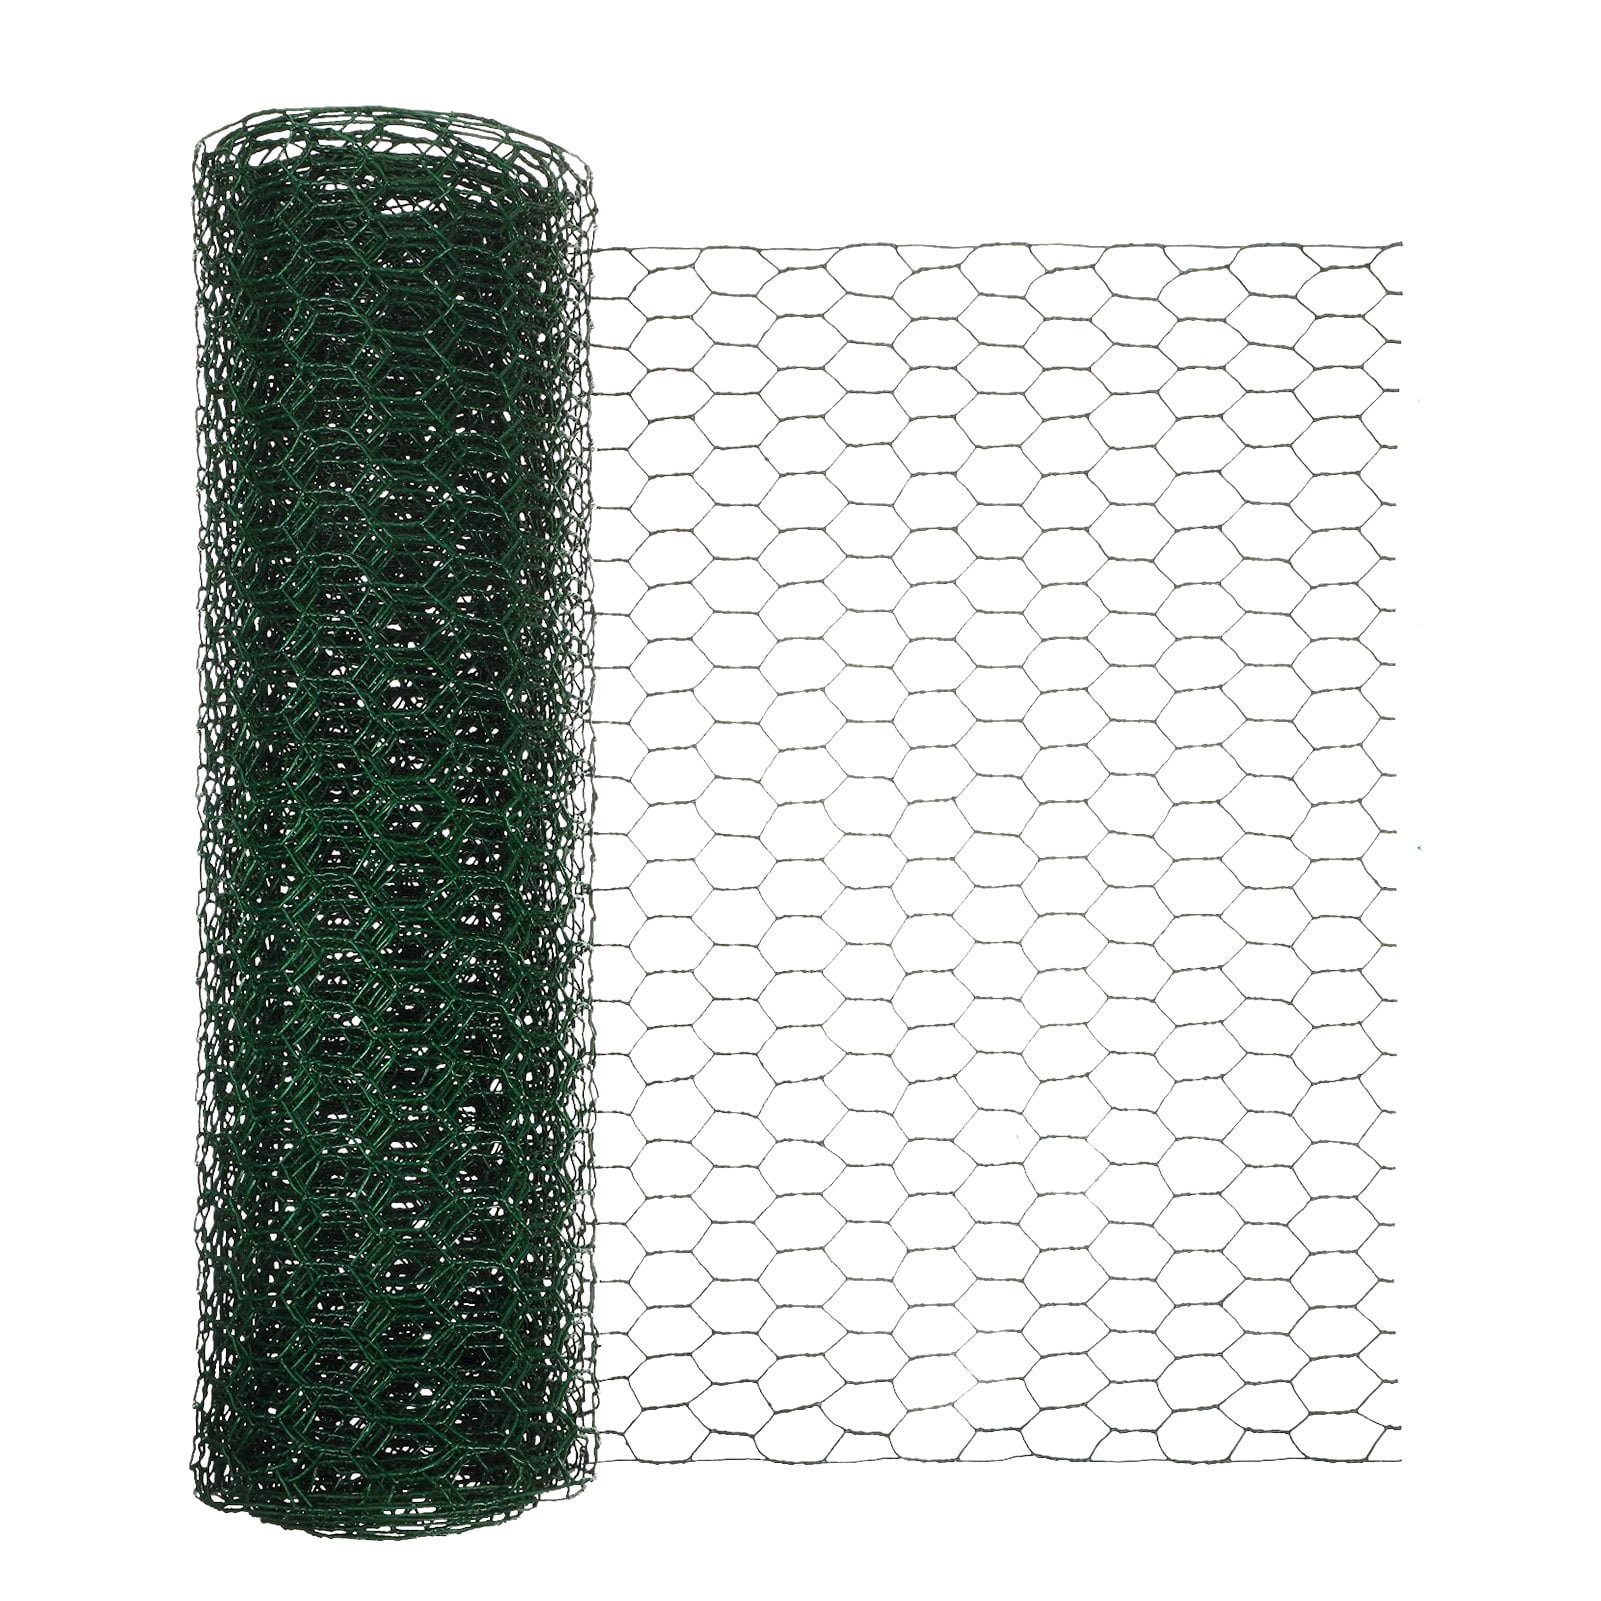 82'x3.3' Chicken Wire Fence Galvanised with PVC Coating Green Barrier 